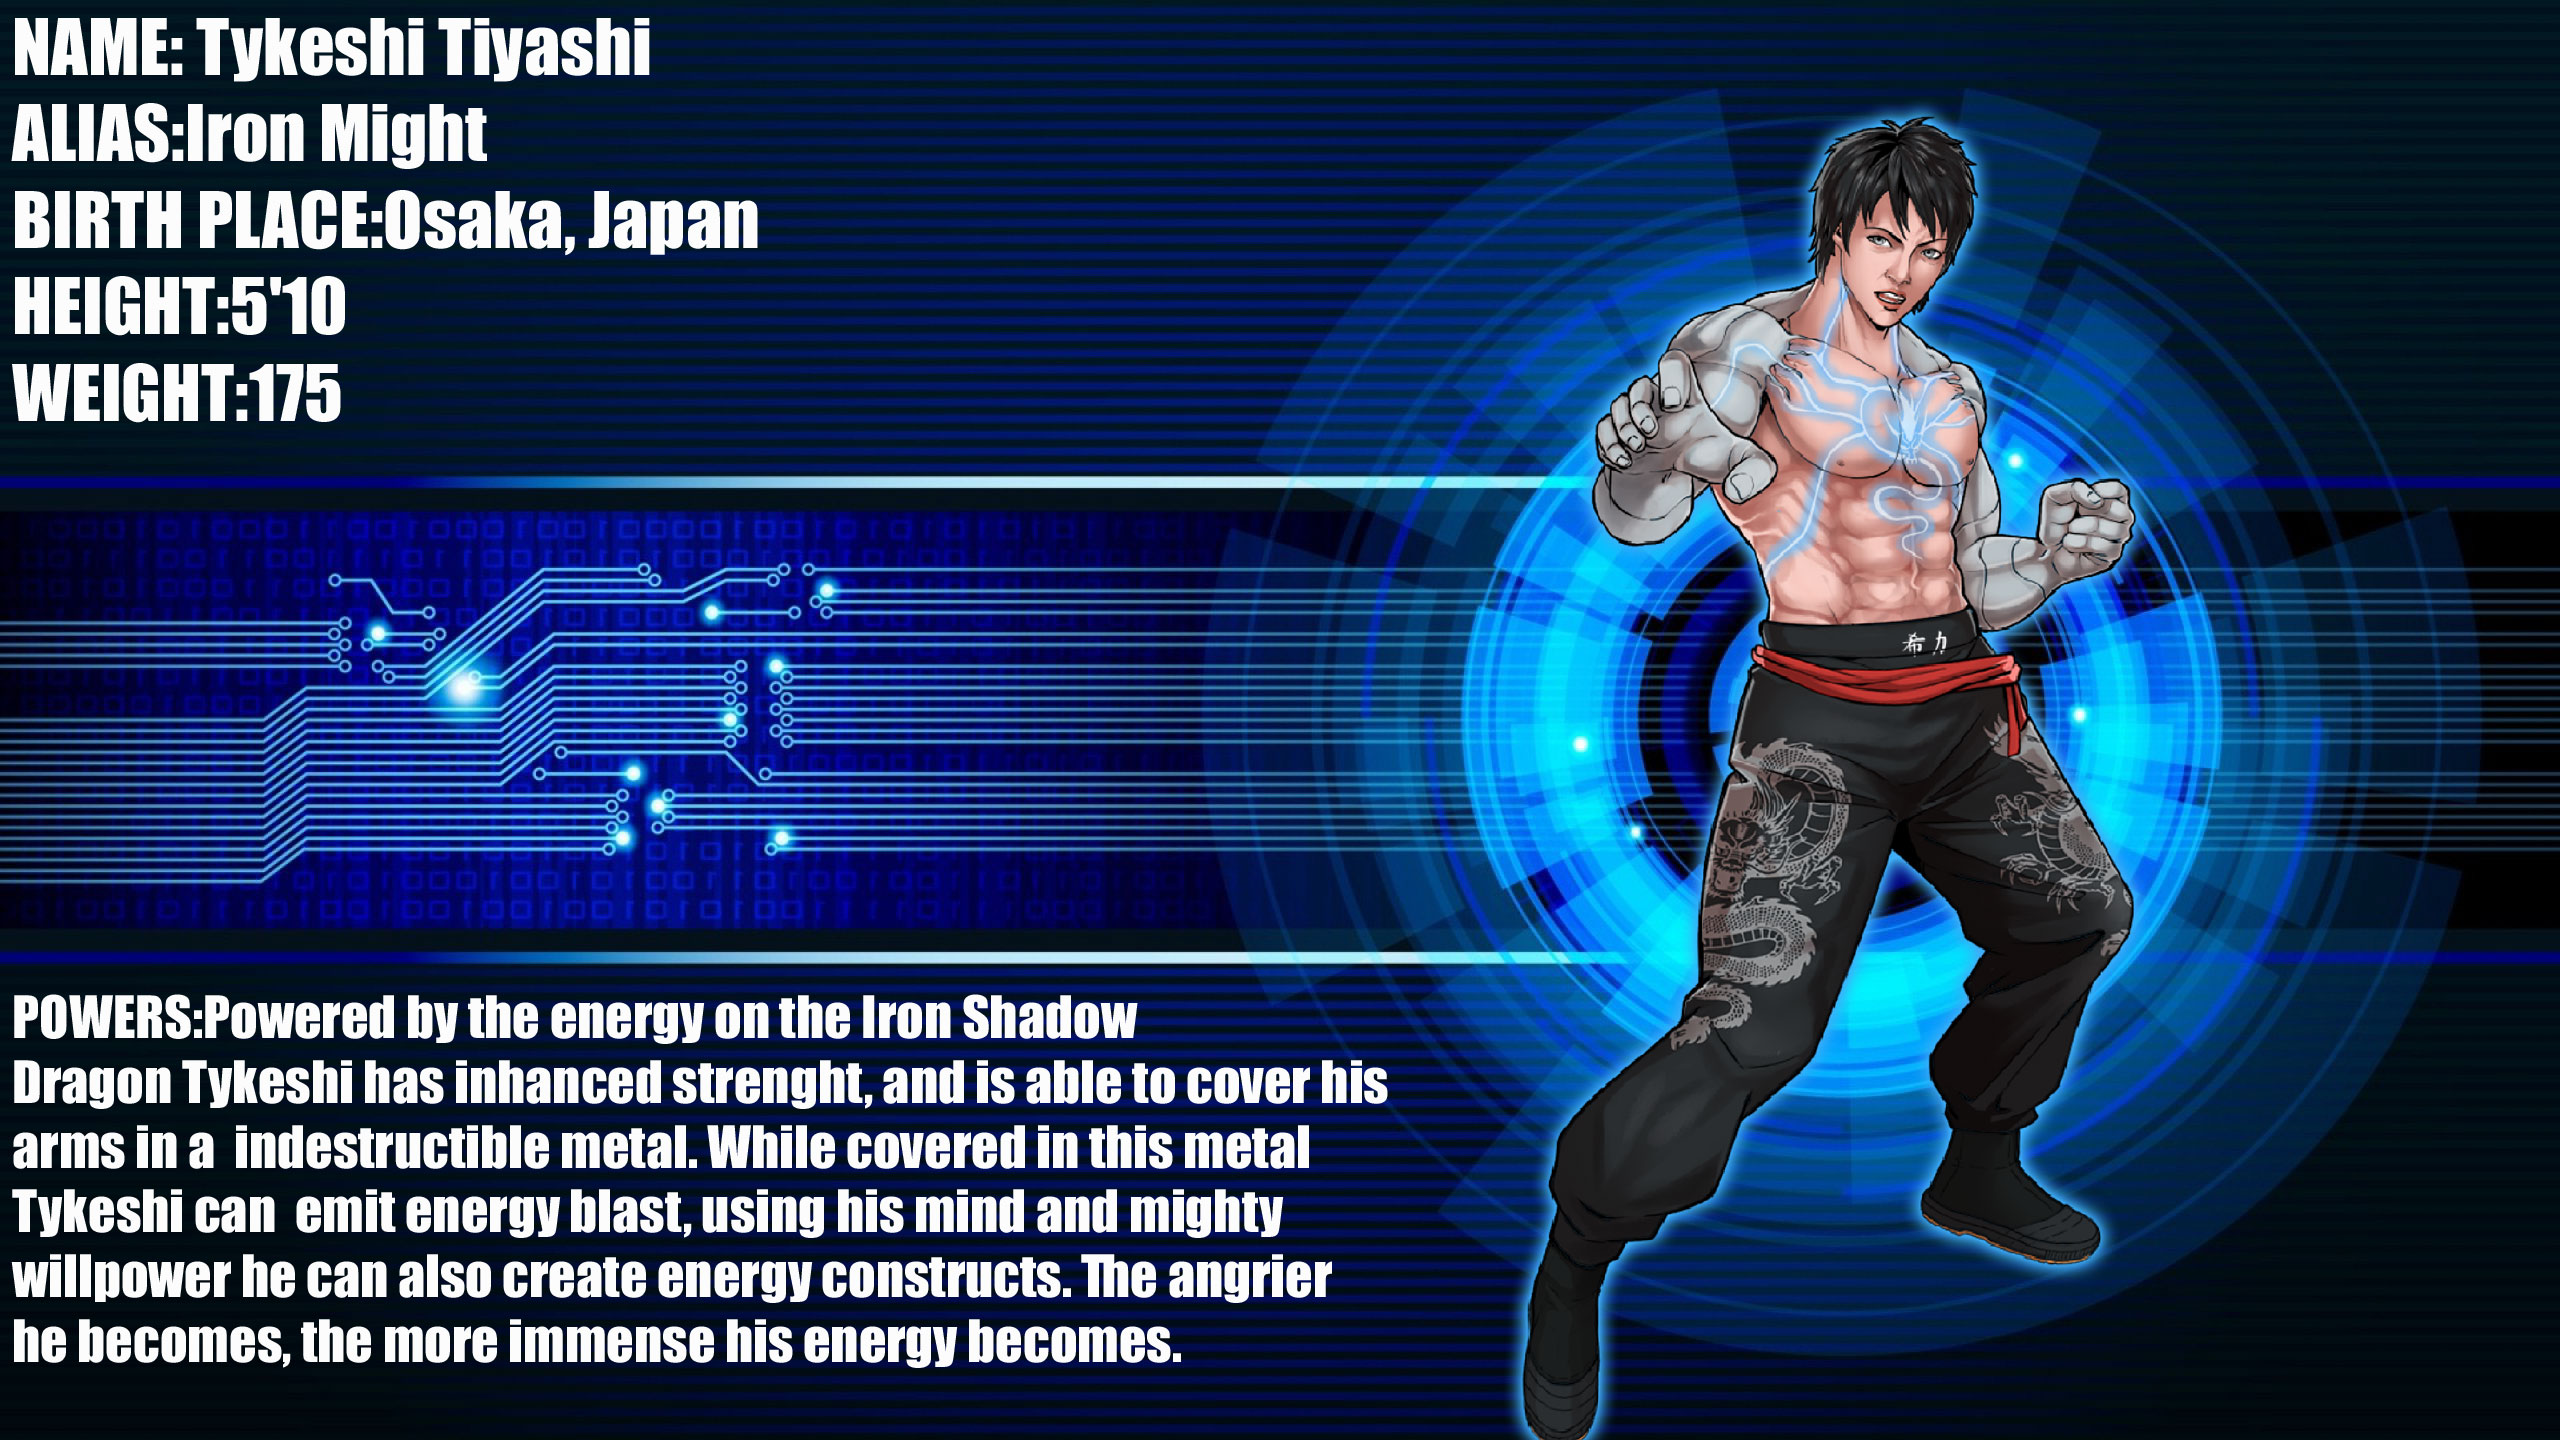 A character from the video game tekken.